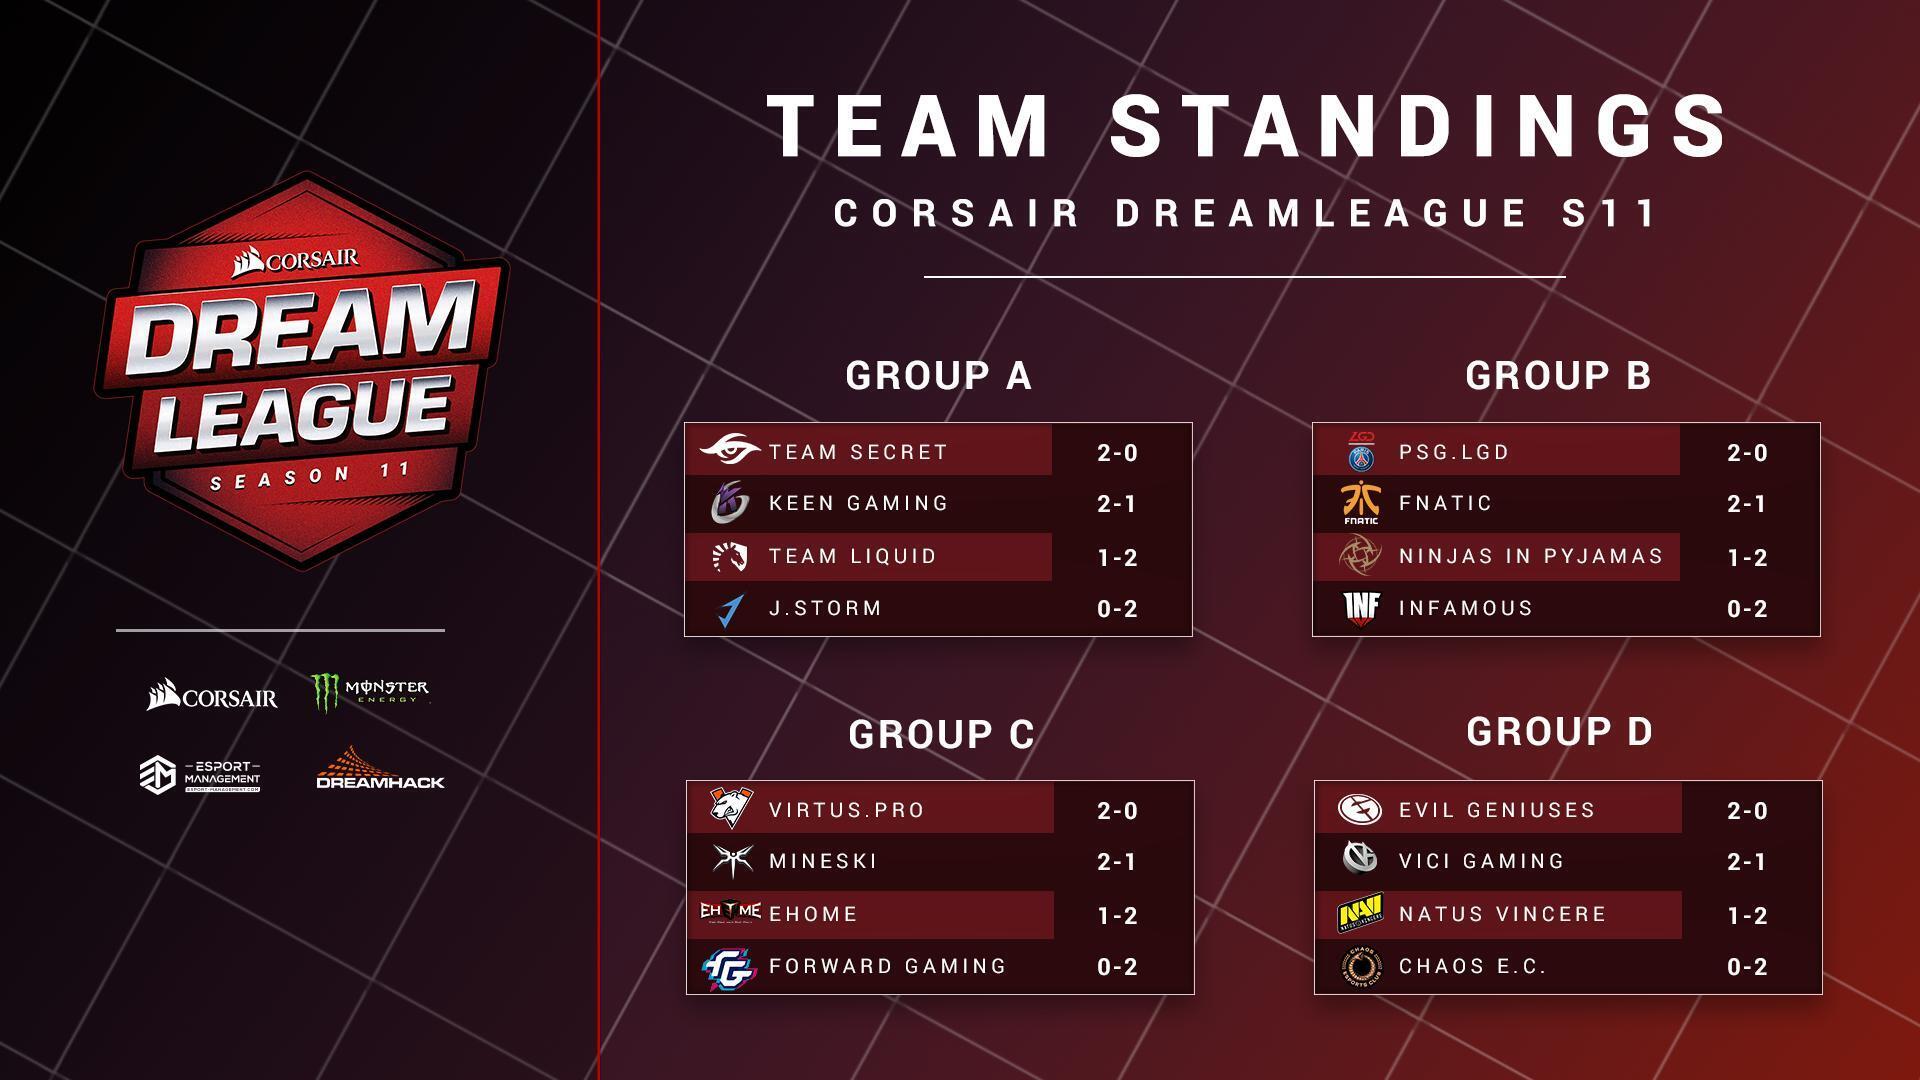 DreamLeague Season 11 has come to a close after two days of intense Dota 2 action with several notable upsets.